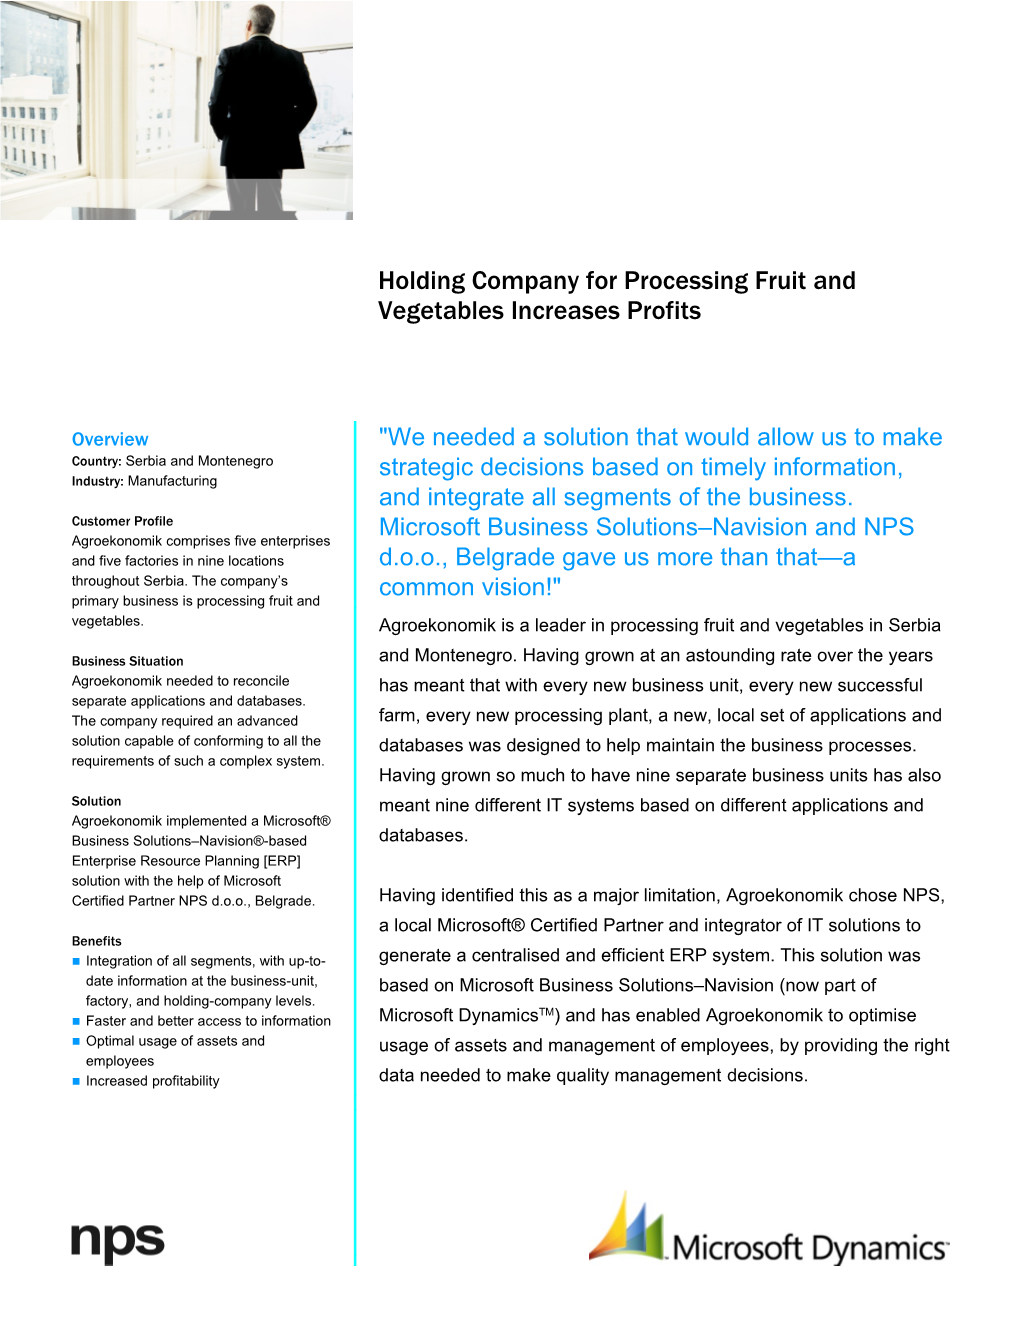 Holding Company for Processing Fruit and Vegetables Increases Profits